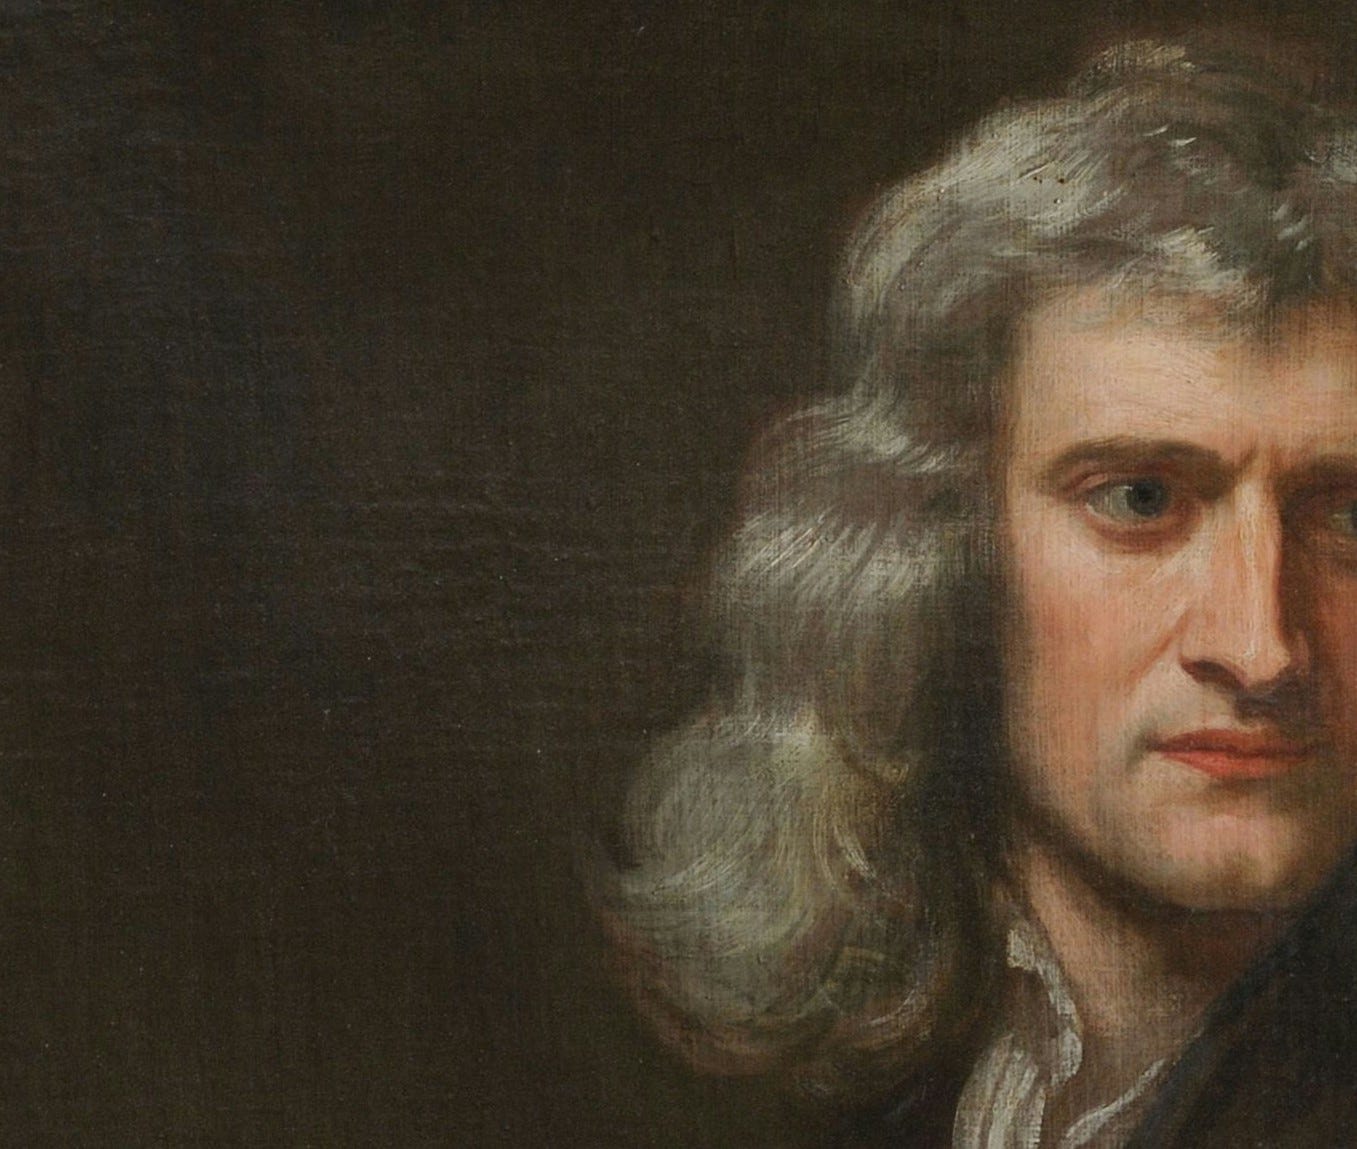 14 Weird Facts About Isaac Newton You Won't Believe Are True, by Aima, Lessons from History